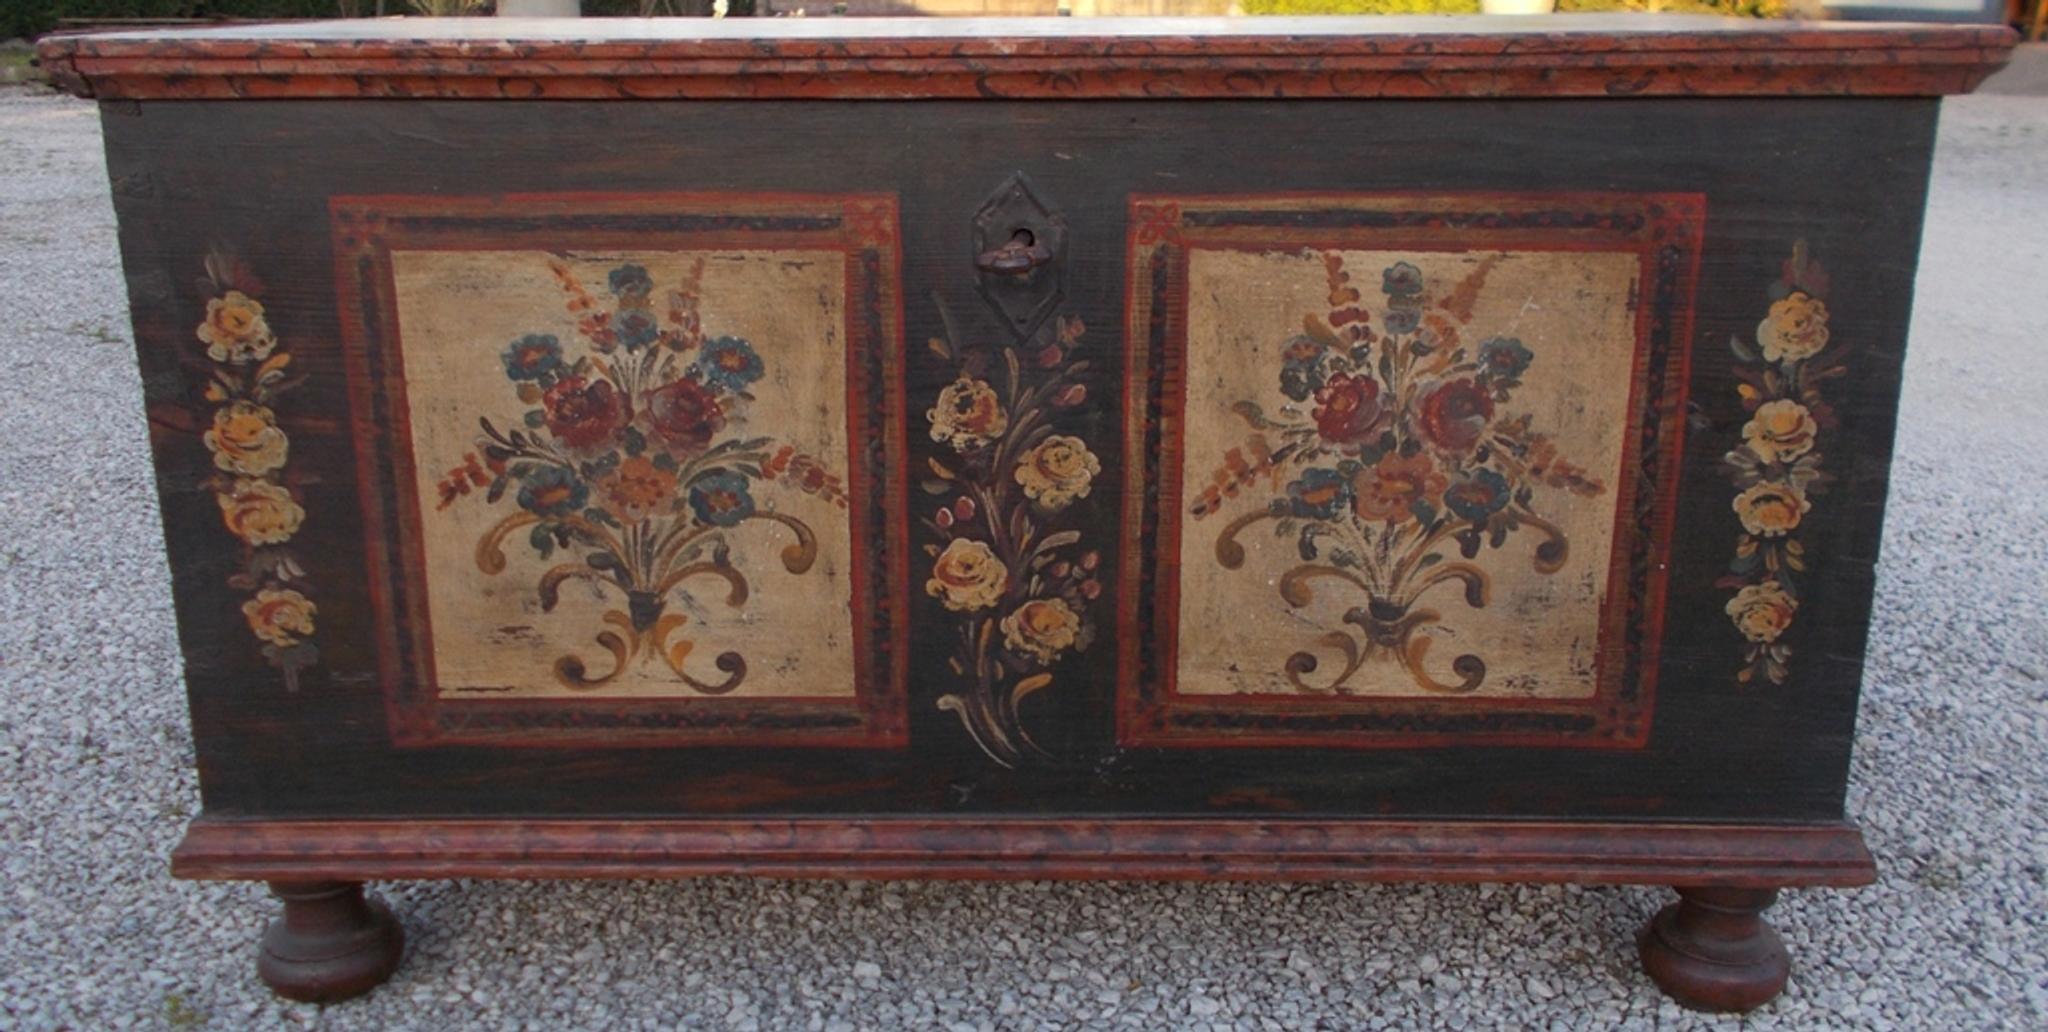 Decorated larch wooden chest
Mid 19th century
Complete with all hardware and original painting
Restored with conservative method
Internal drawer and secrets
From south tyrol zone